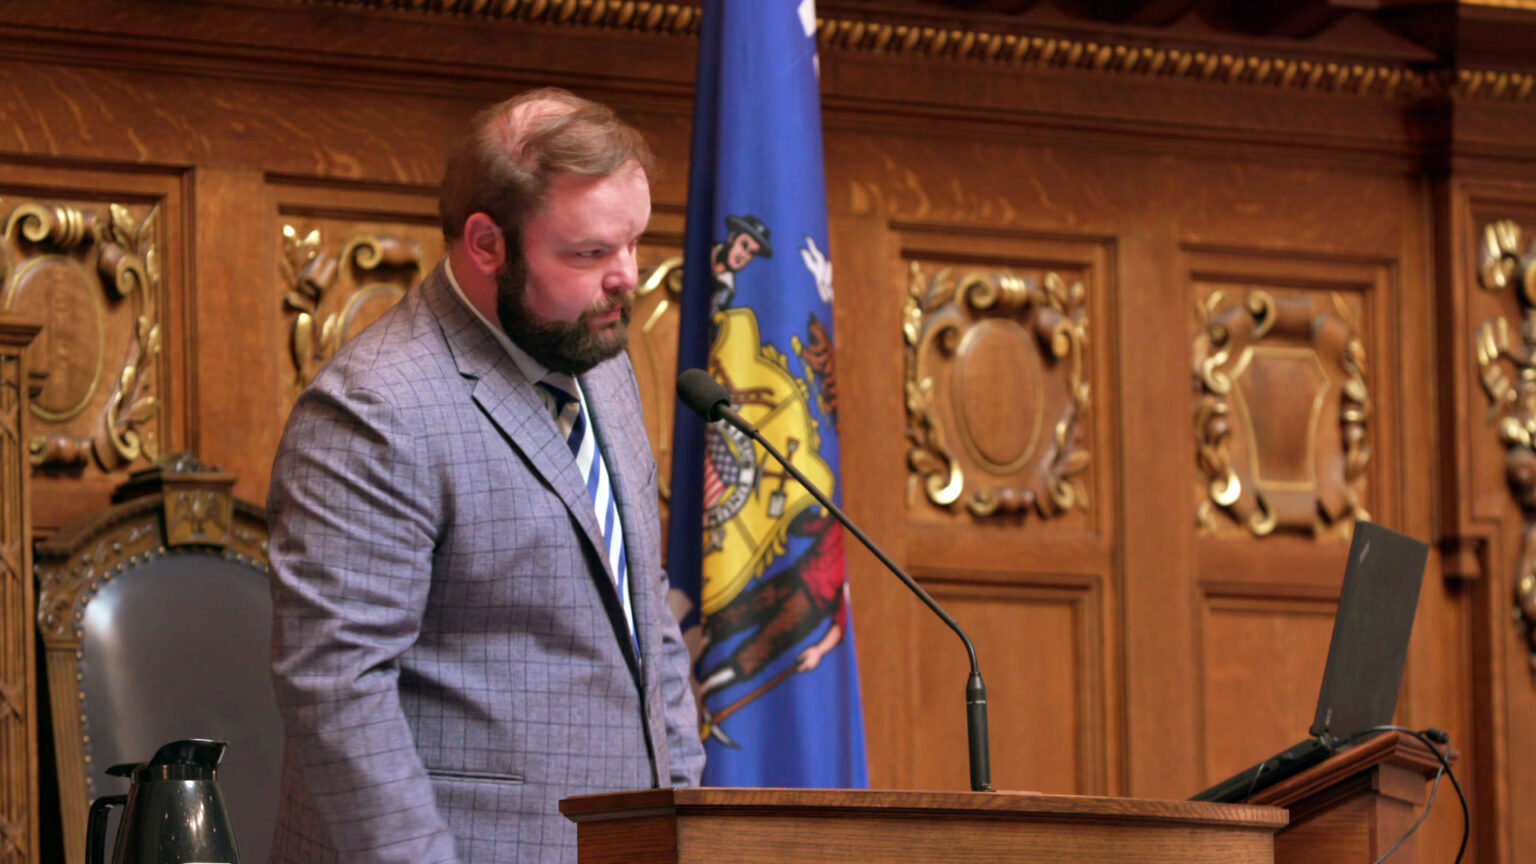 Tyler August stands in front of a dais and speaks into a microphone while facing an open laptop computer, with a Wisconsin flag and wood-paneled wall with bas-reliefs of stylized shields in the background.